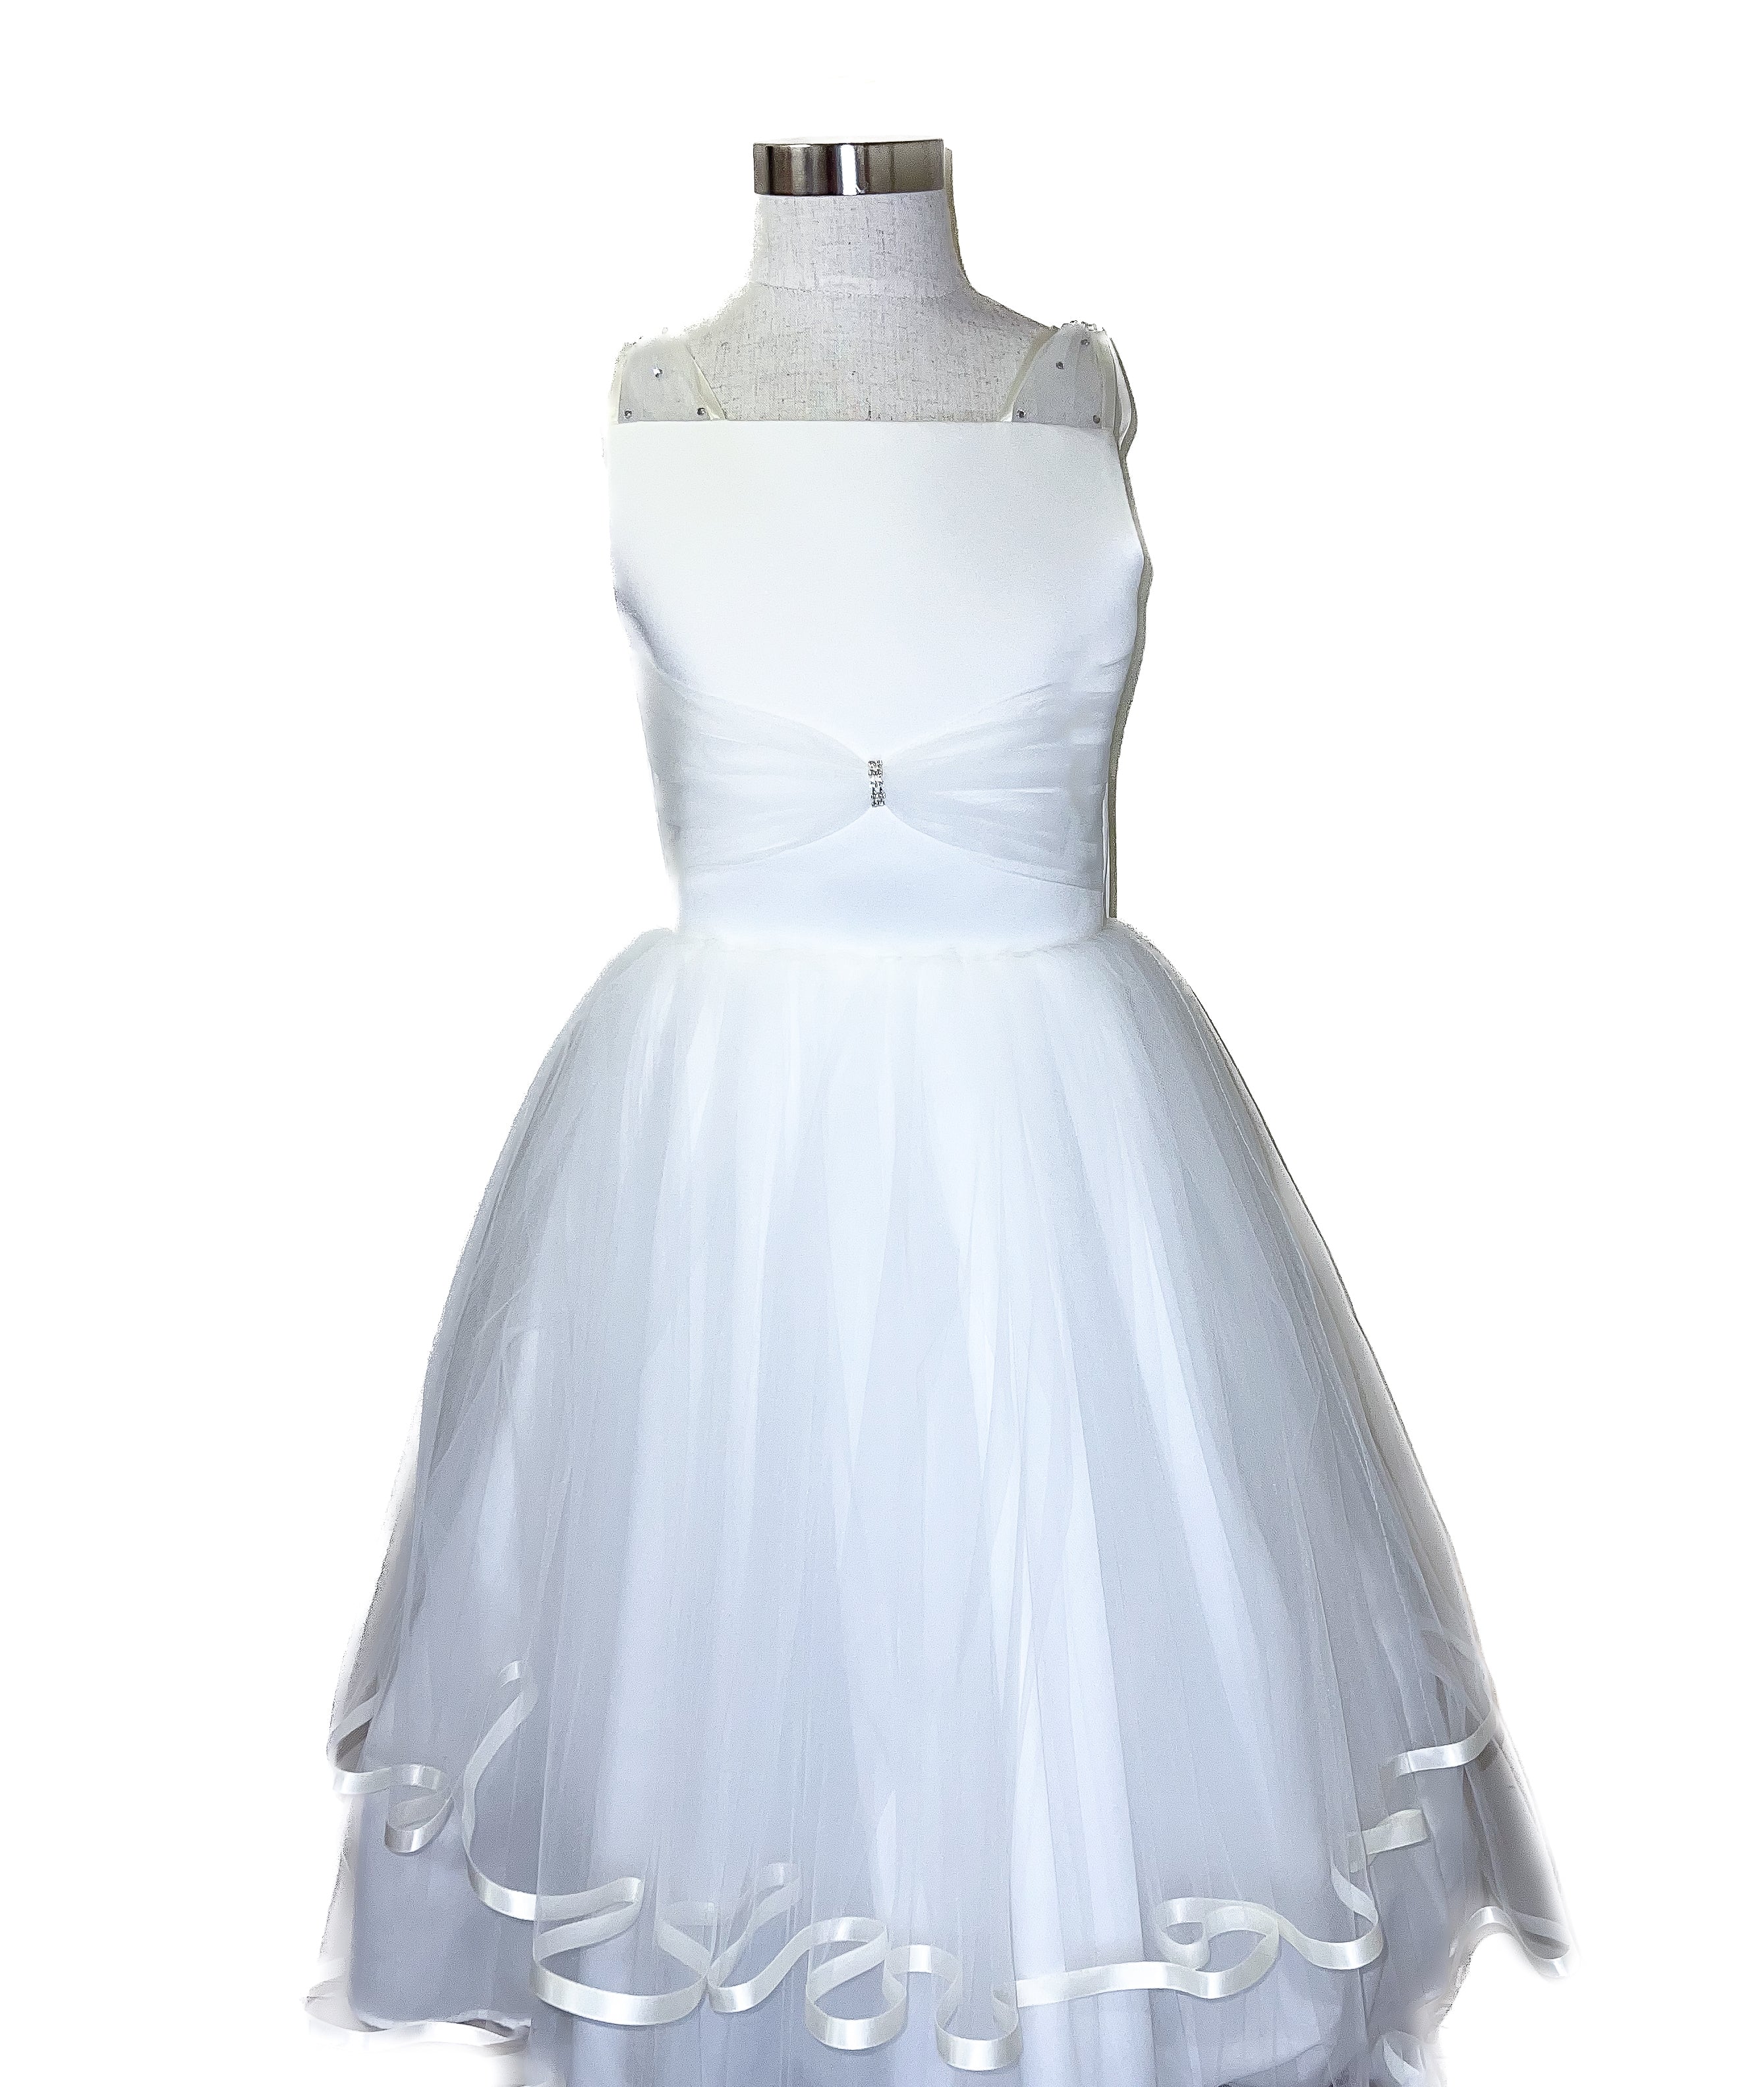 Tulle and Satin w Double Ruffle Skirt Communion Dress